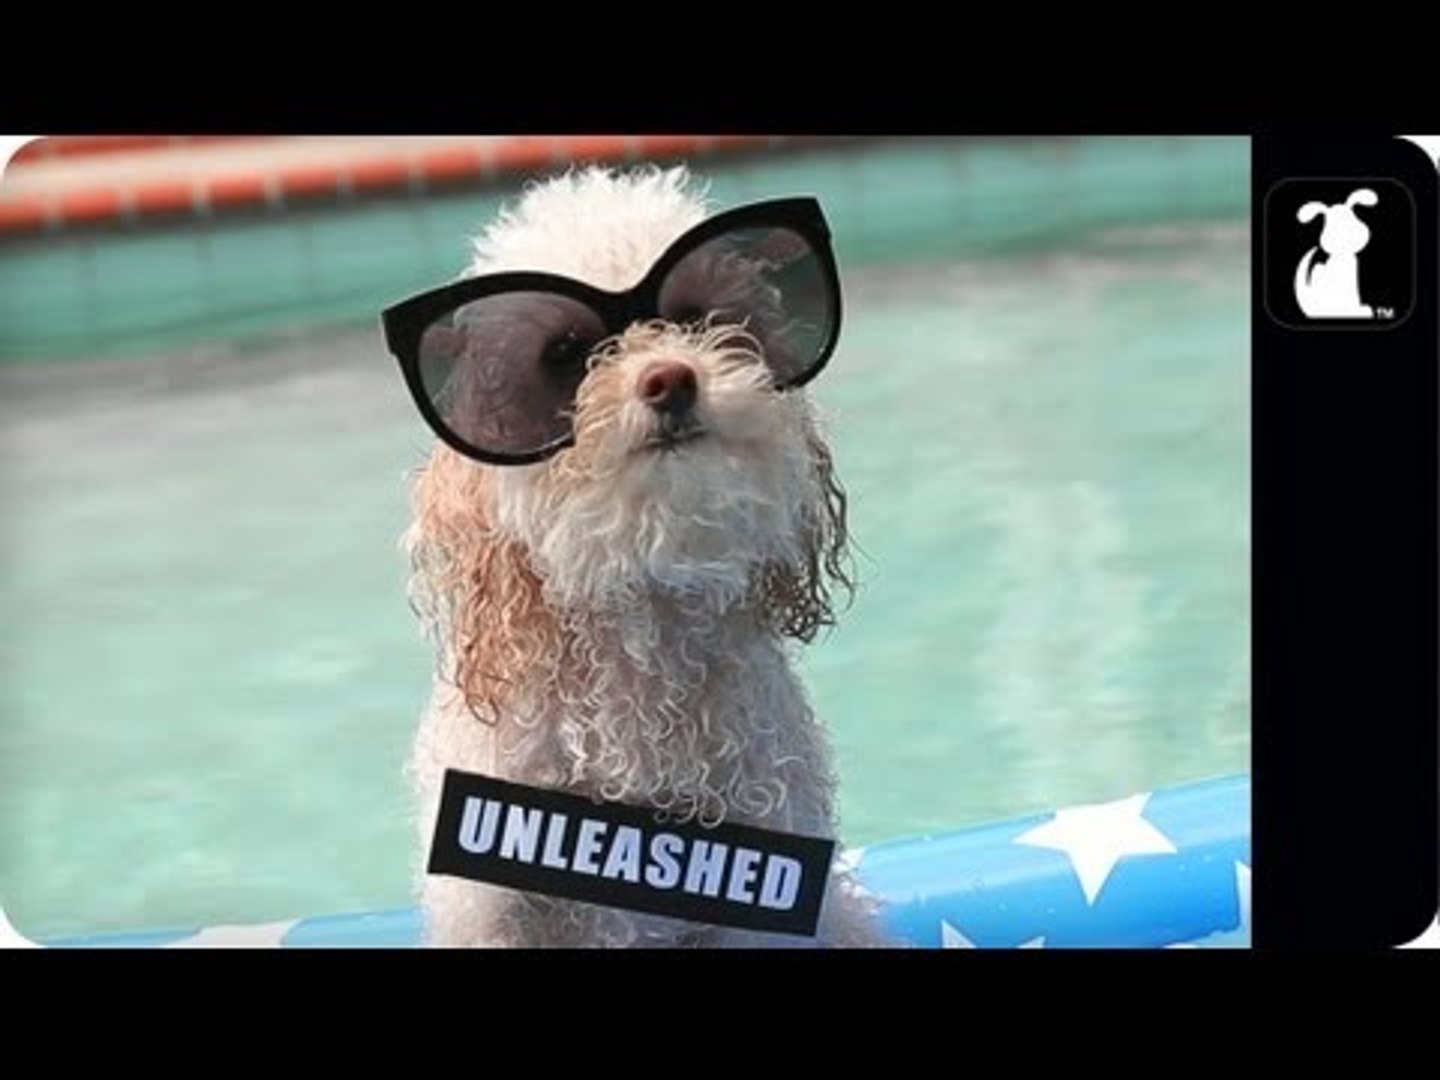 Miley Cyrus - We Can't Stop (PET PARODY) - Maltey Cyrus - We Can Bark